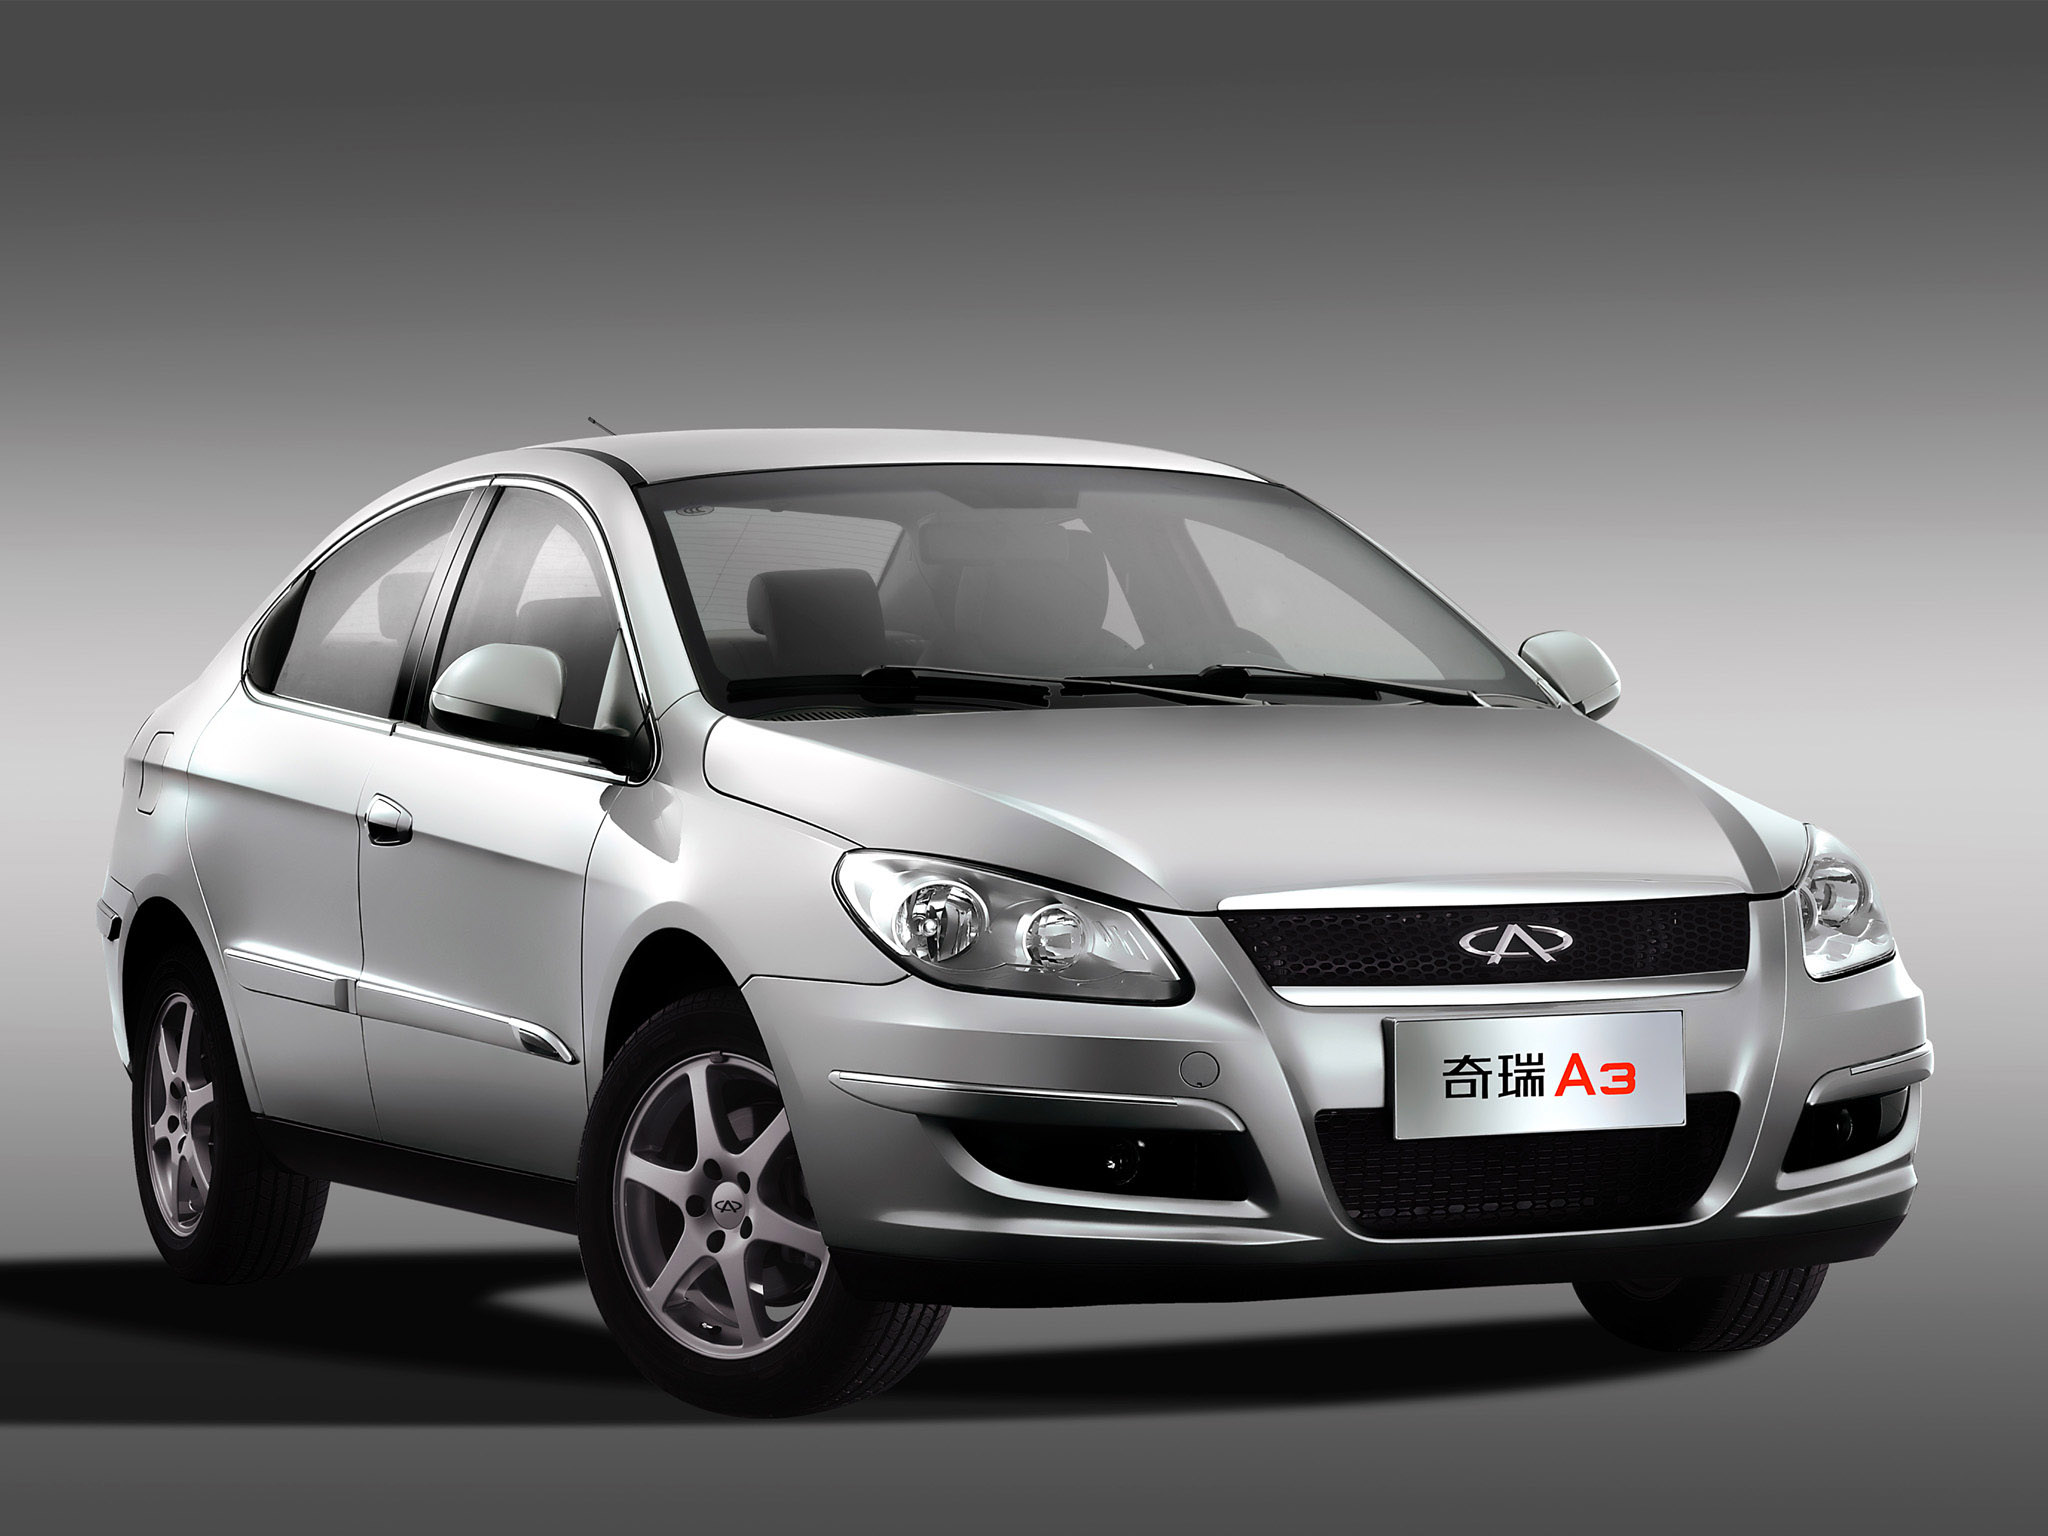 HQ Chery A3 Wallpapers | File 290.37Kb